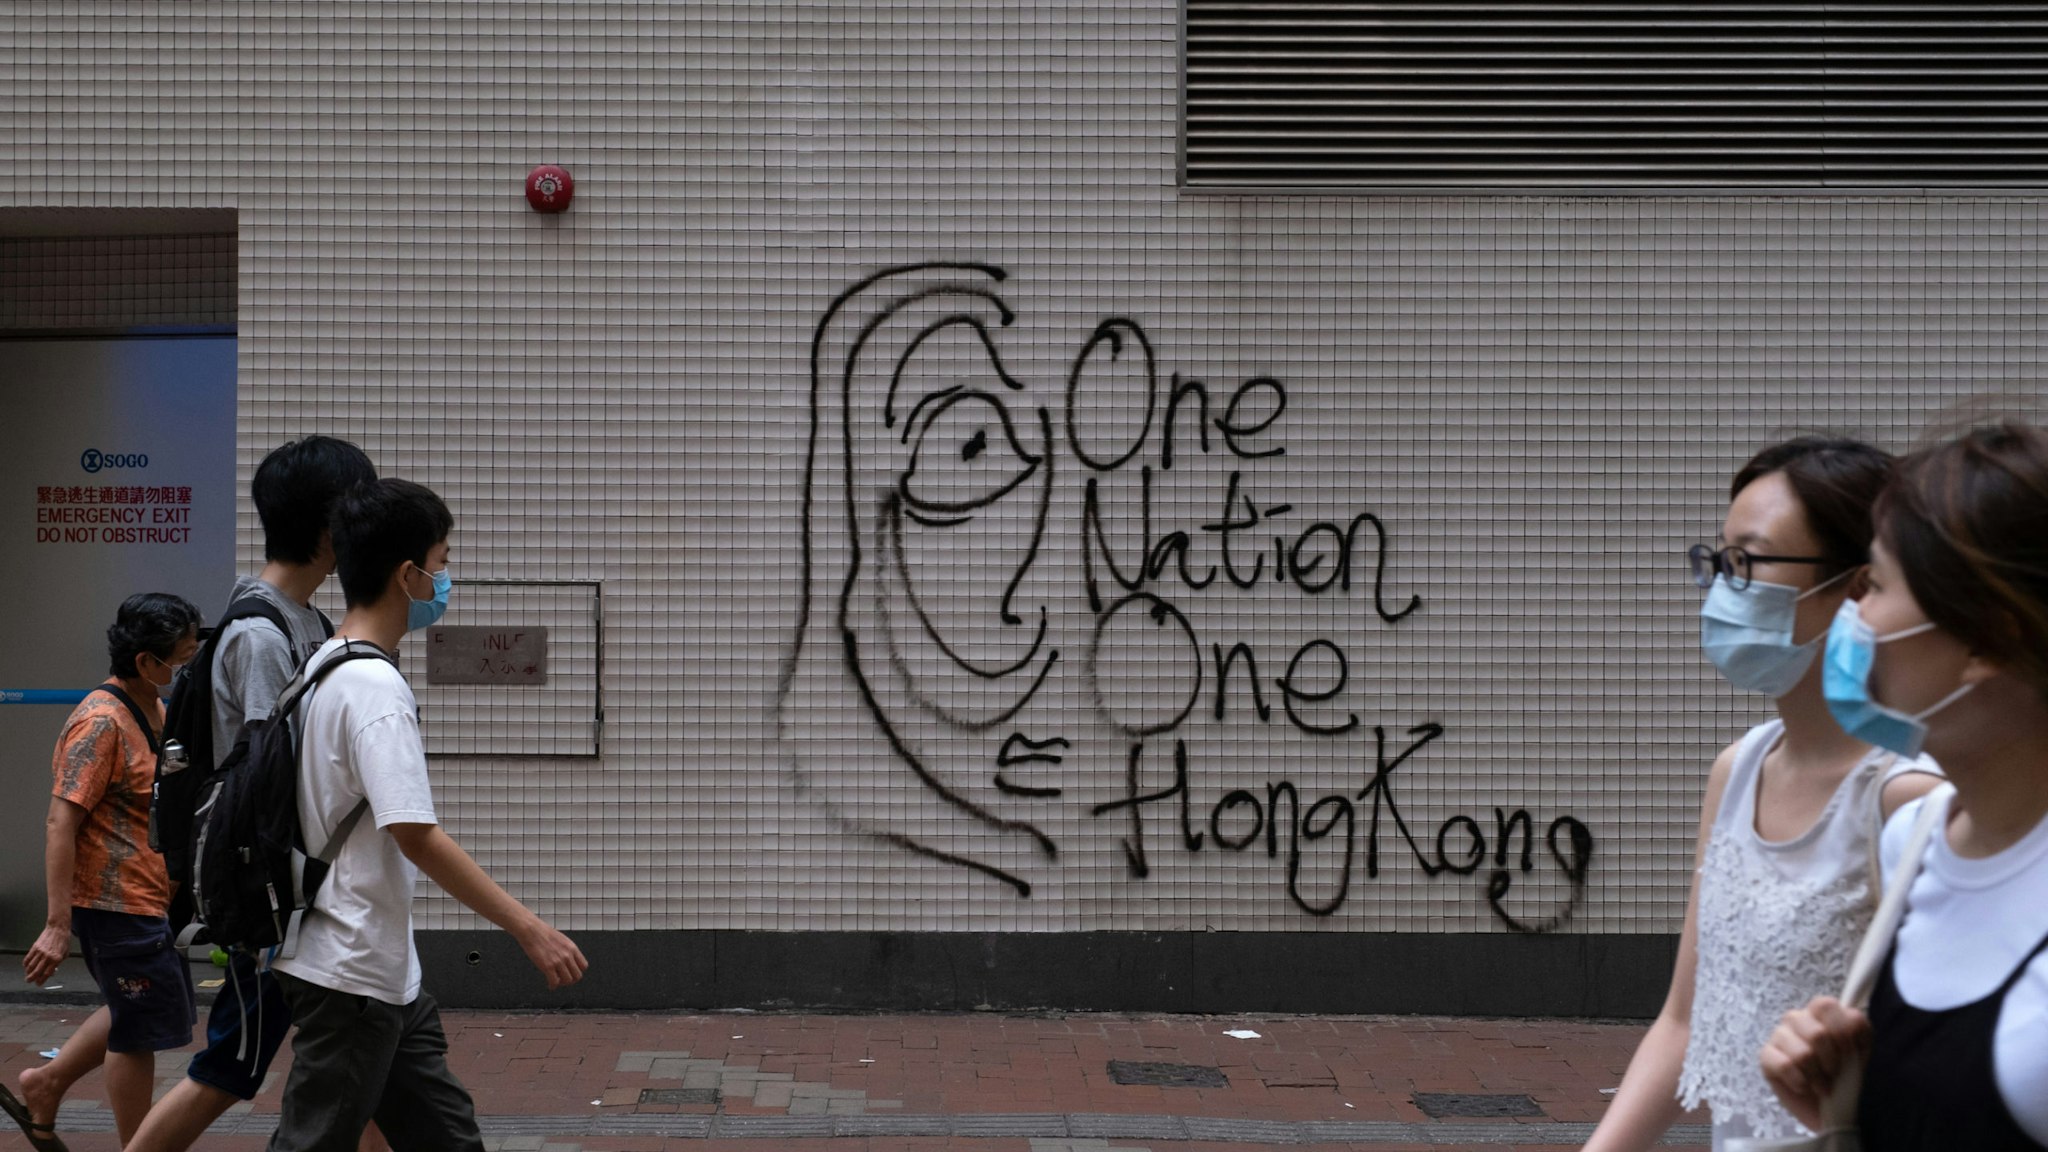 Graffiti reading "One Nation, One Hong Kong" is marked on a wall during a protest against a planned national security law in the Causeway Bay district in Hong Kong, China, on Sunday, May 24, 2020. Almost 200 politicians and legislators from 23 countries issued a joint statement criticizing Chinas plans to impose a sweeping national security law in Hong Kong, and warned that it could spark more protests in the city, Radio and Television Hong Kong reported. Photographer: Roy Liu/Bloomberg via Getty Images